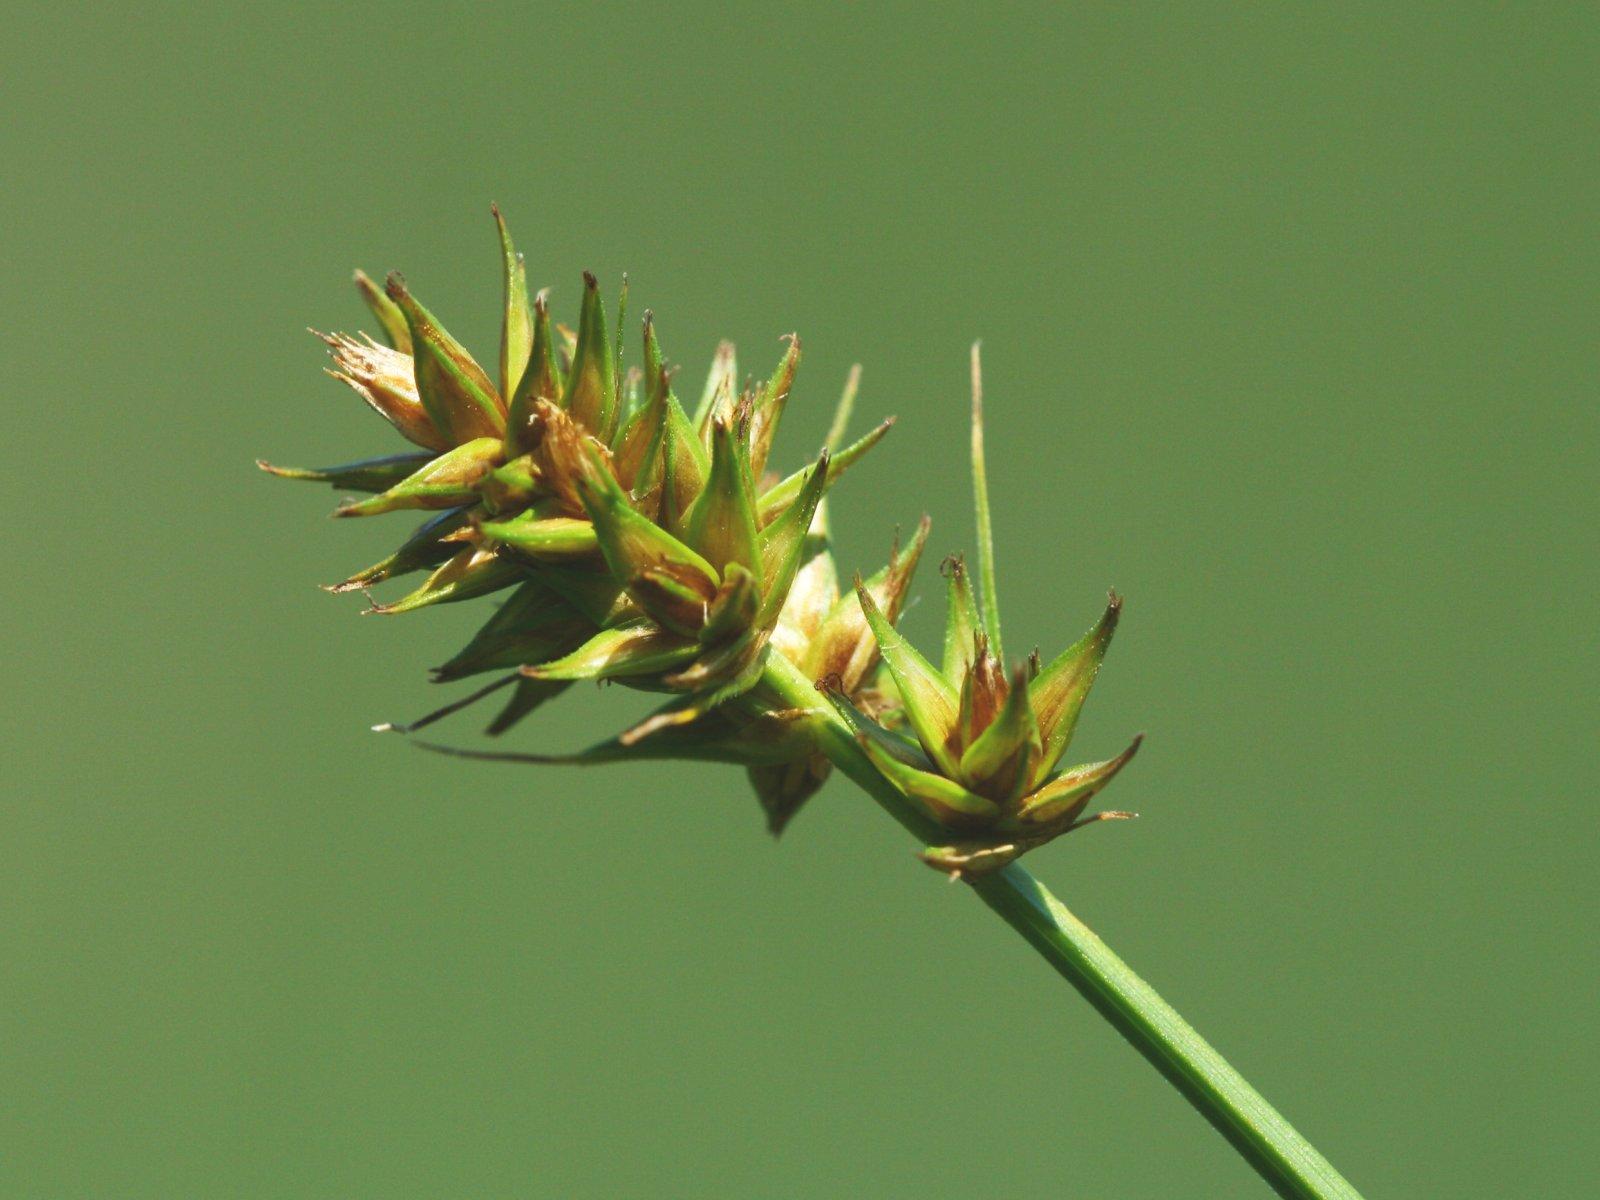 lime-brown spikelets with green stem